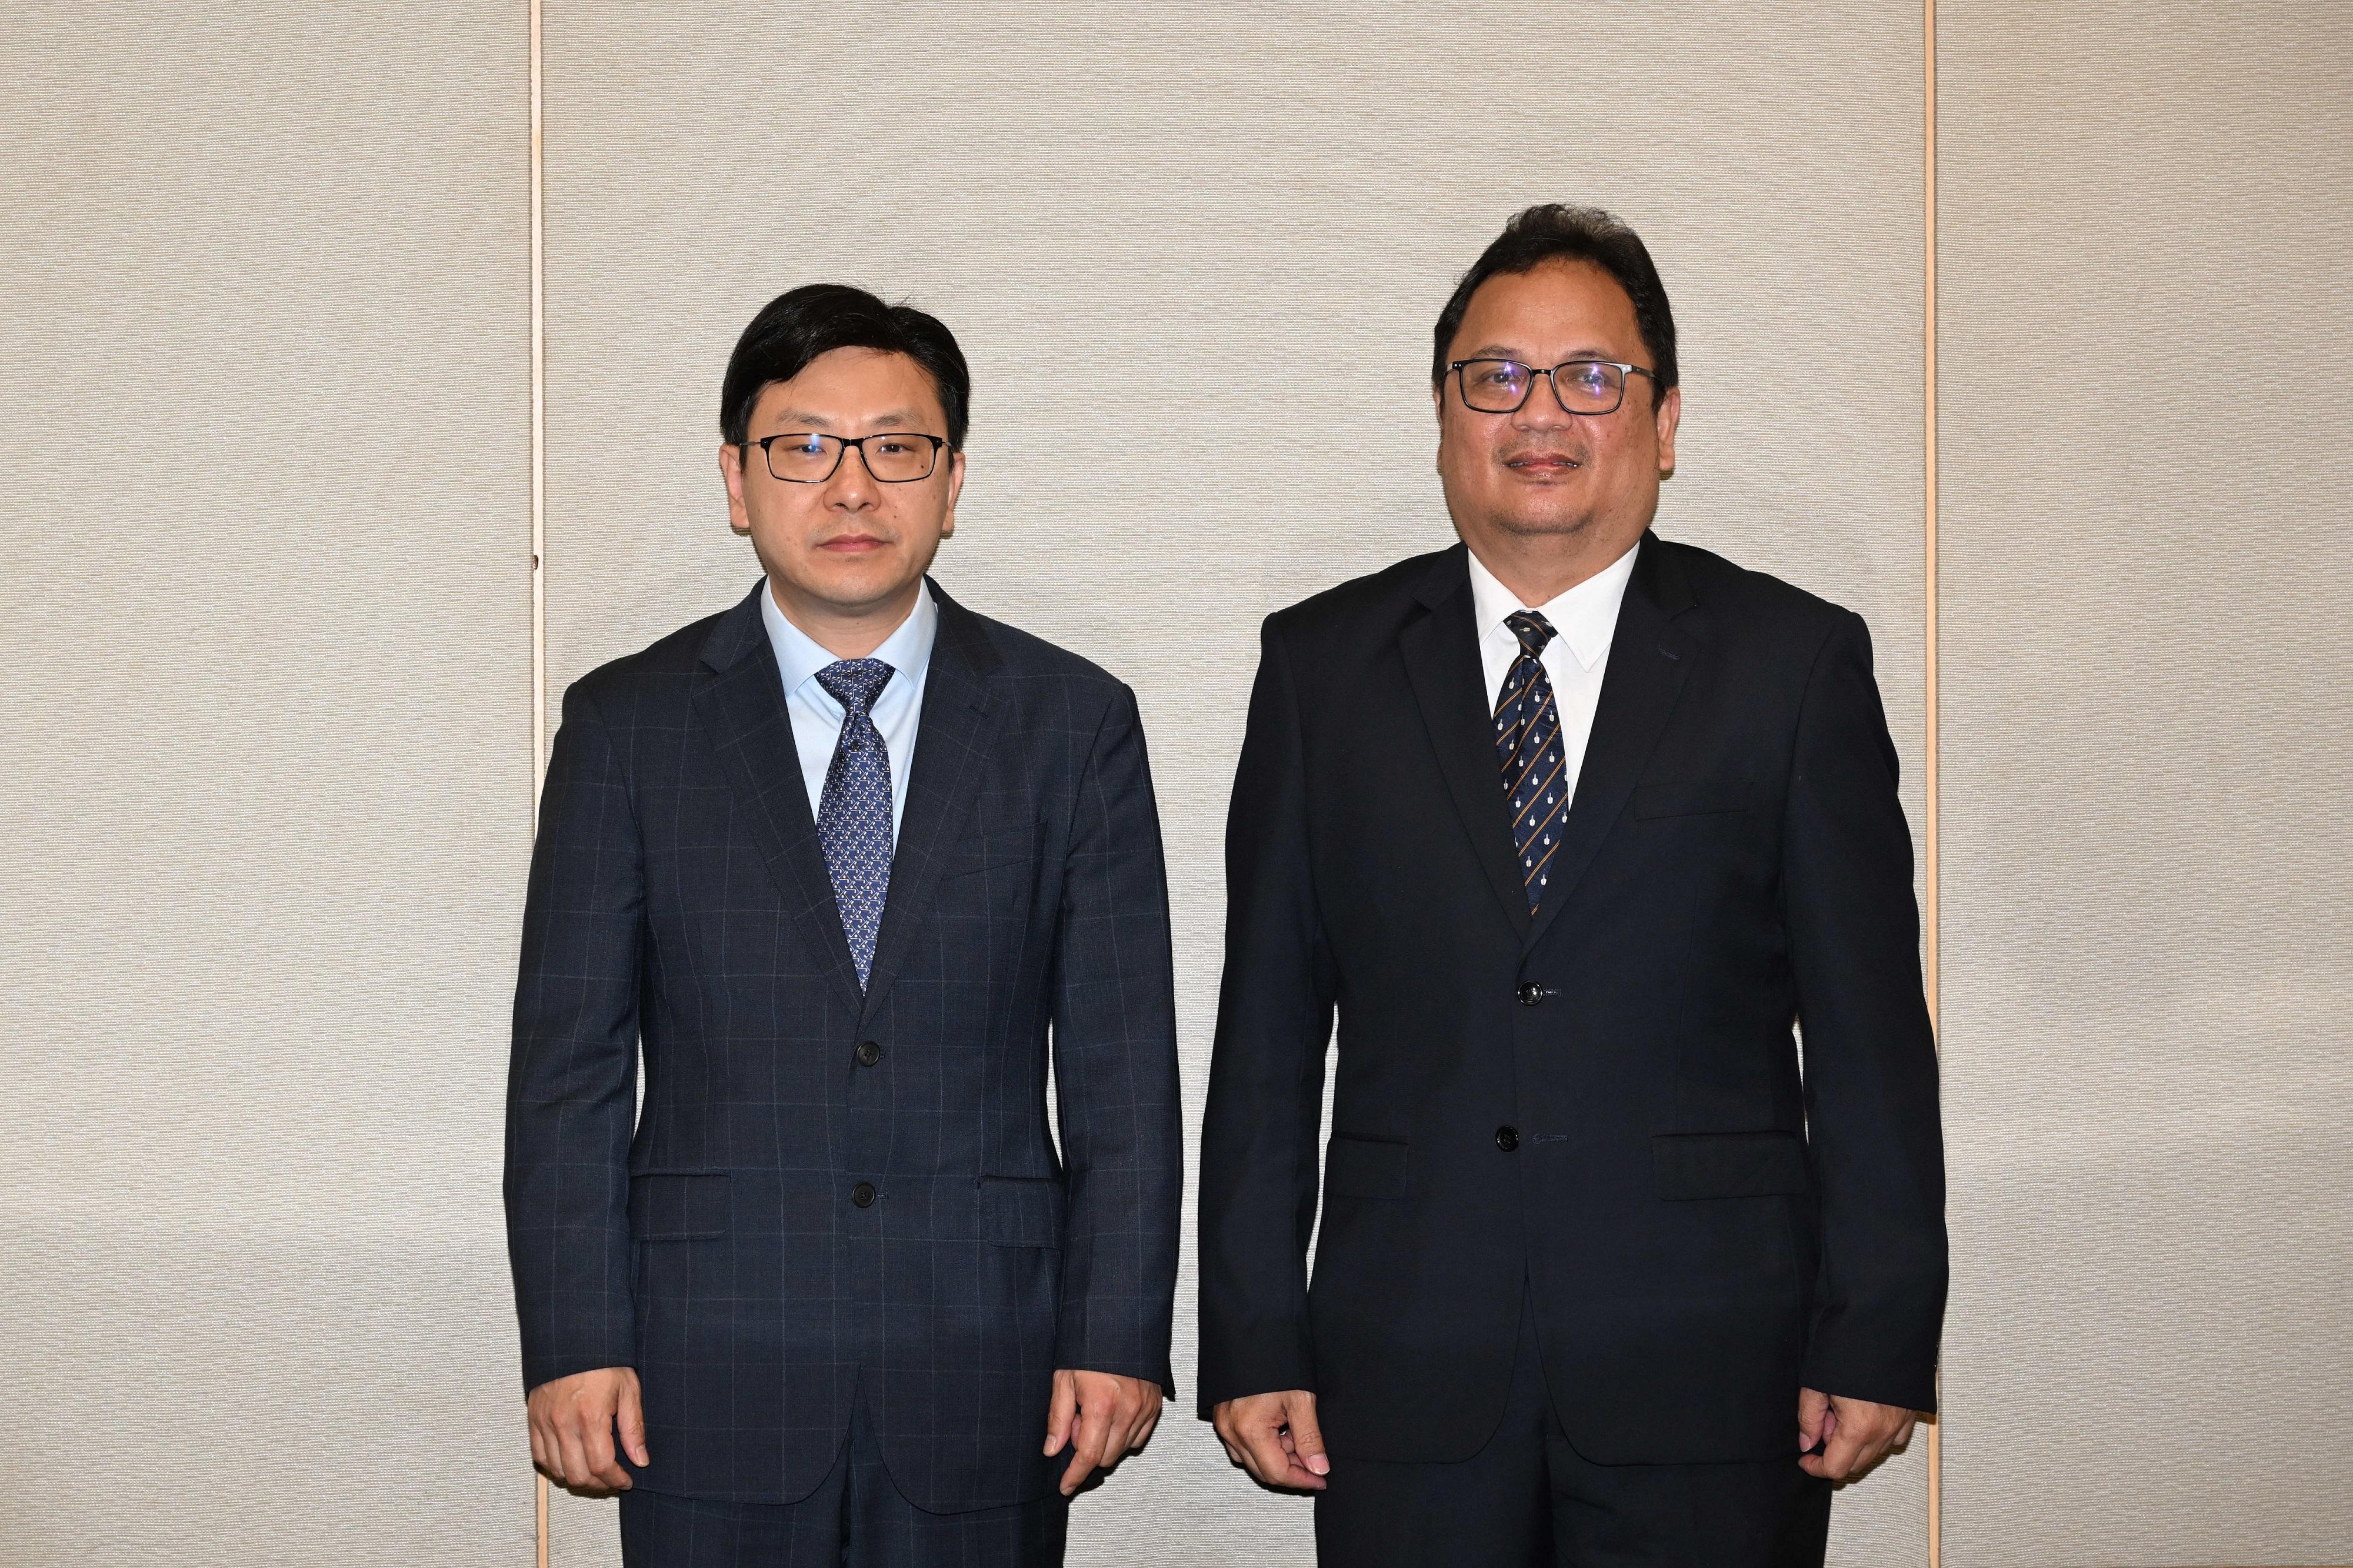 The Secretary for Labour and Welfare, Mr Chris Sun (left), today (August 10) met the Acting Consul-General of the Republic of Indonesia in Hong Kong, Mr Slamet Noegroho (right), to reiterate the stance of the Hong Kong Special Administrative Region Government on the issue of placement fees for the employment of Indonesian domestic helpers. Representatives of the Labour Department also attended the meeting.